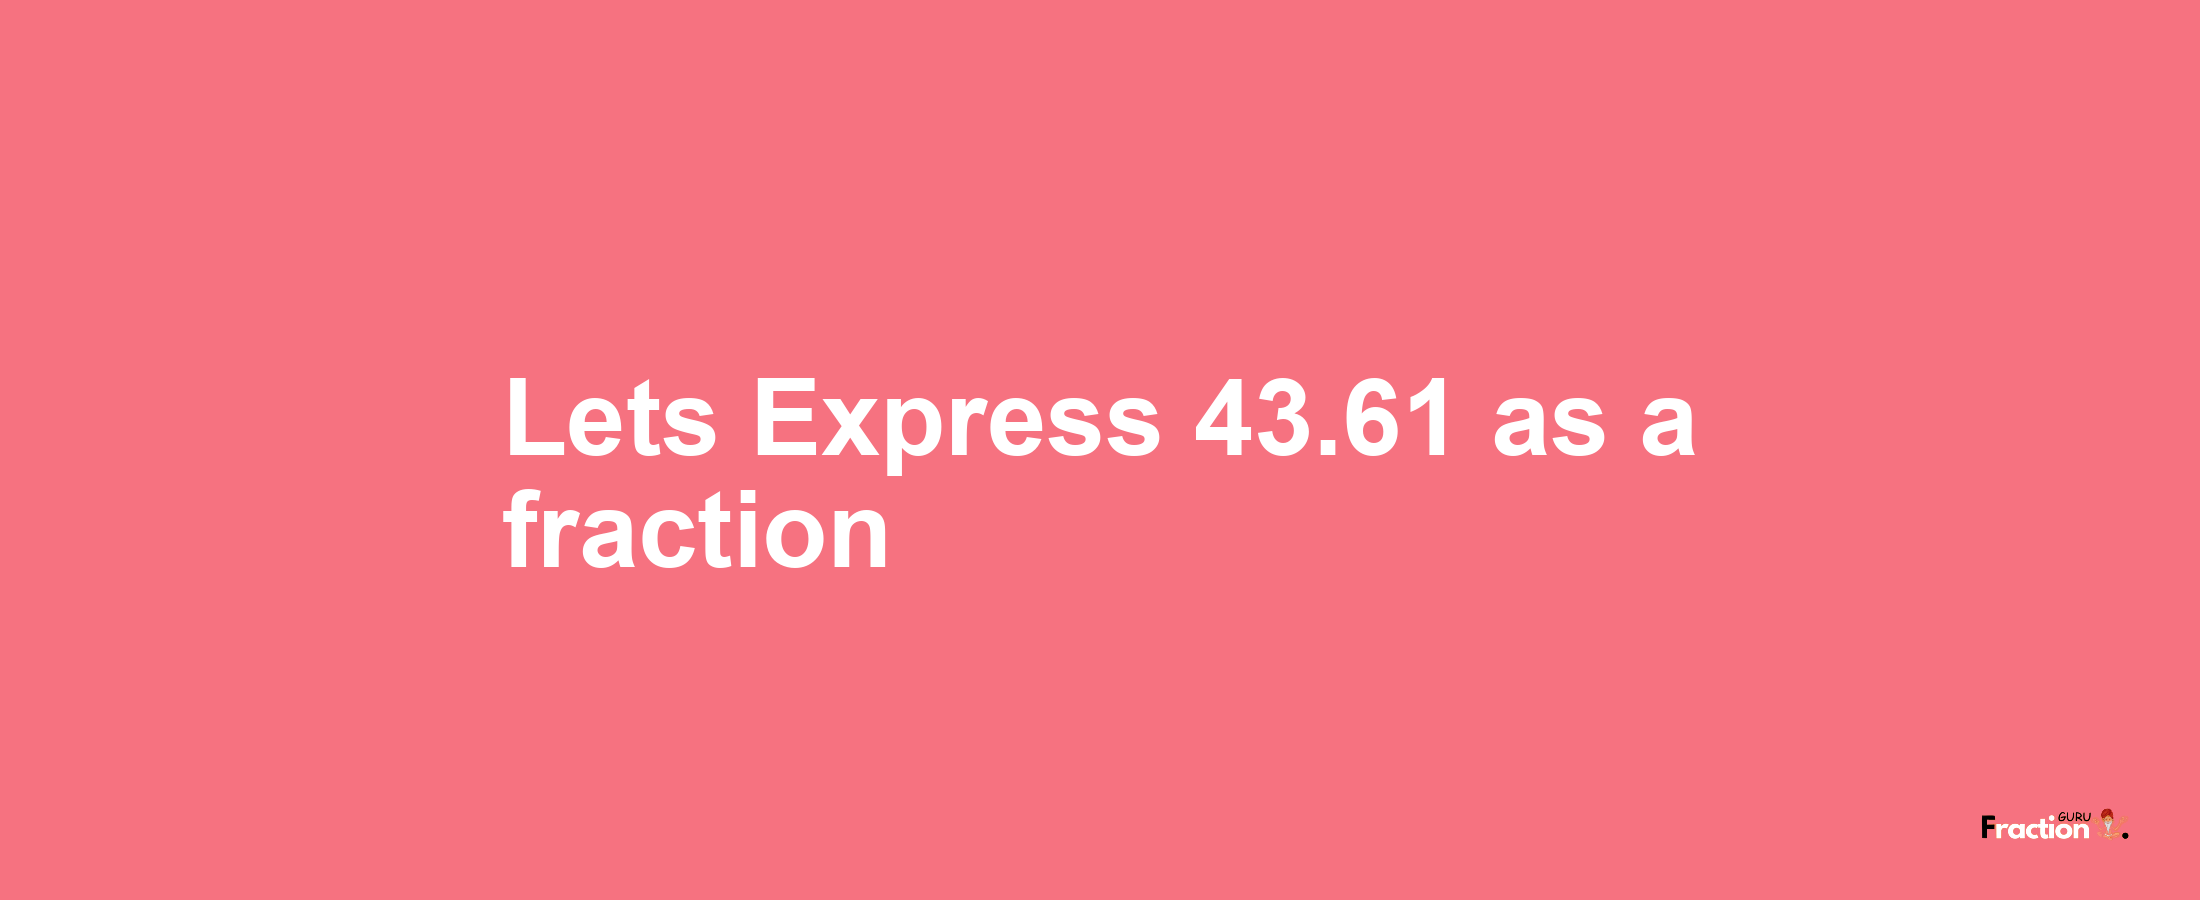 Lets Express 43.61 as afraction